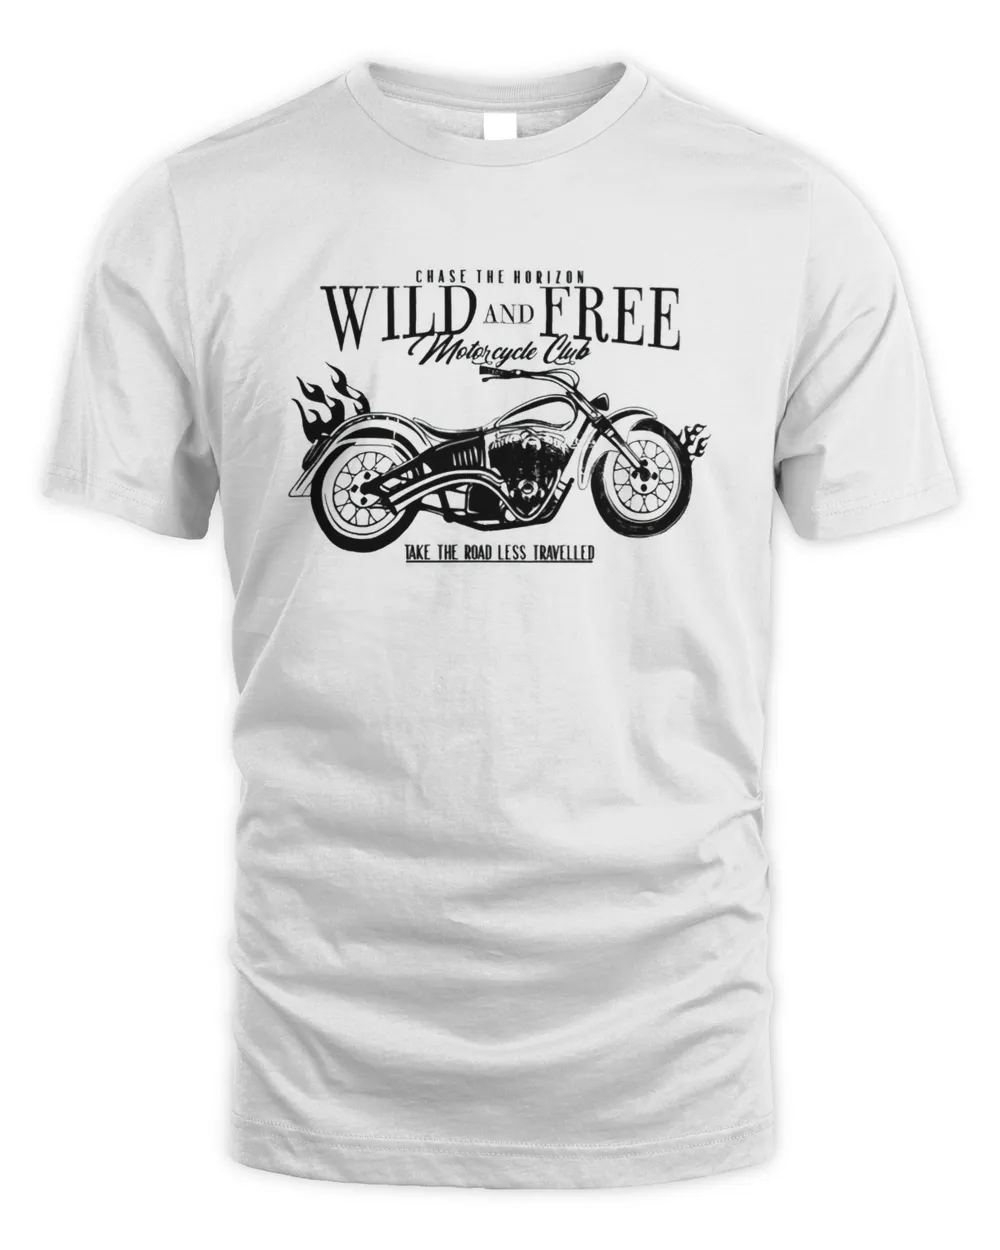 Chase the horizon wild and frees motorcycle club shirt